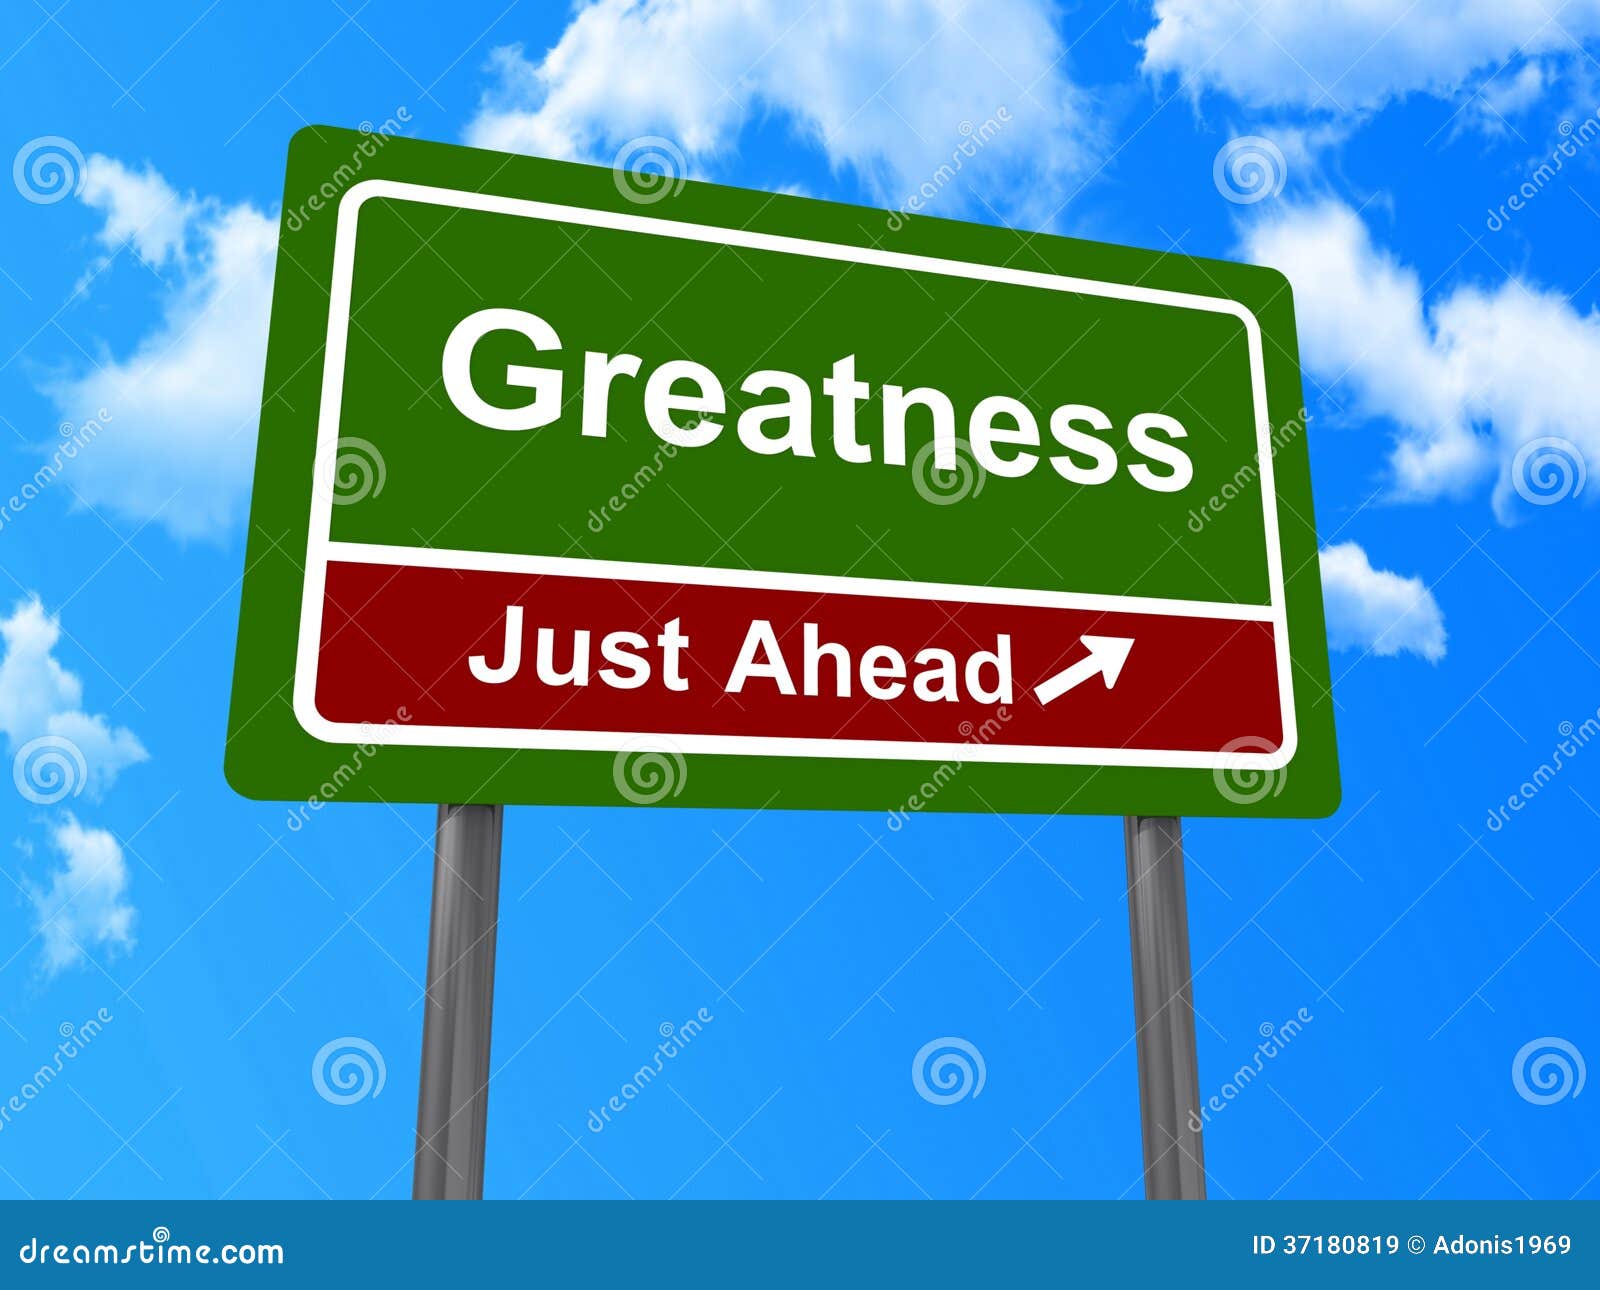 greatness just ahead sign